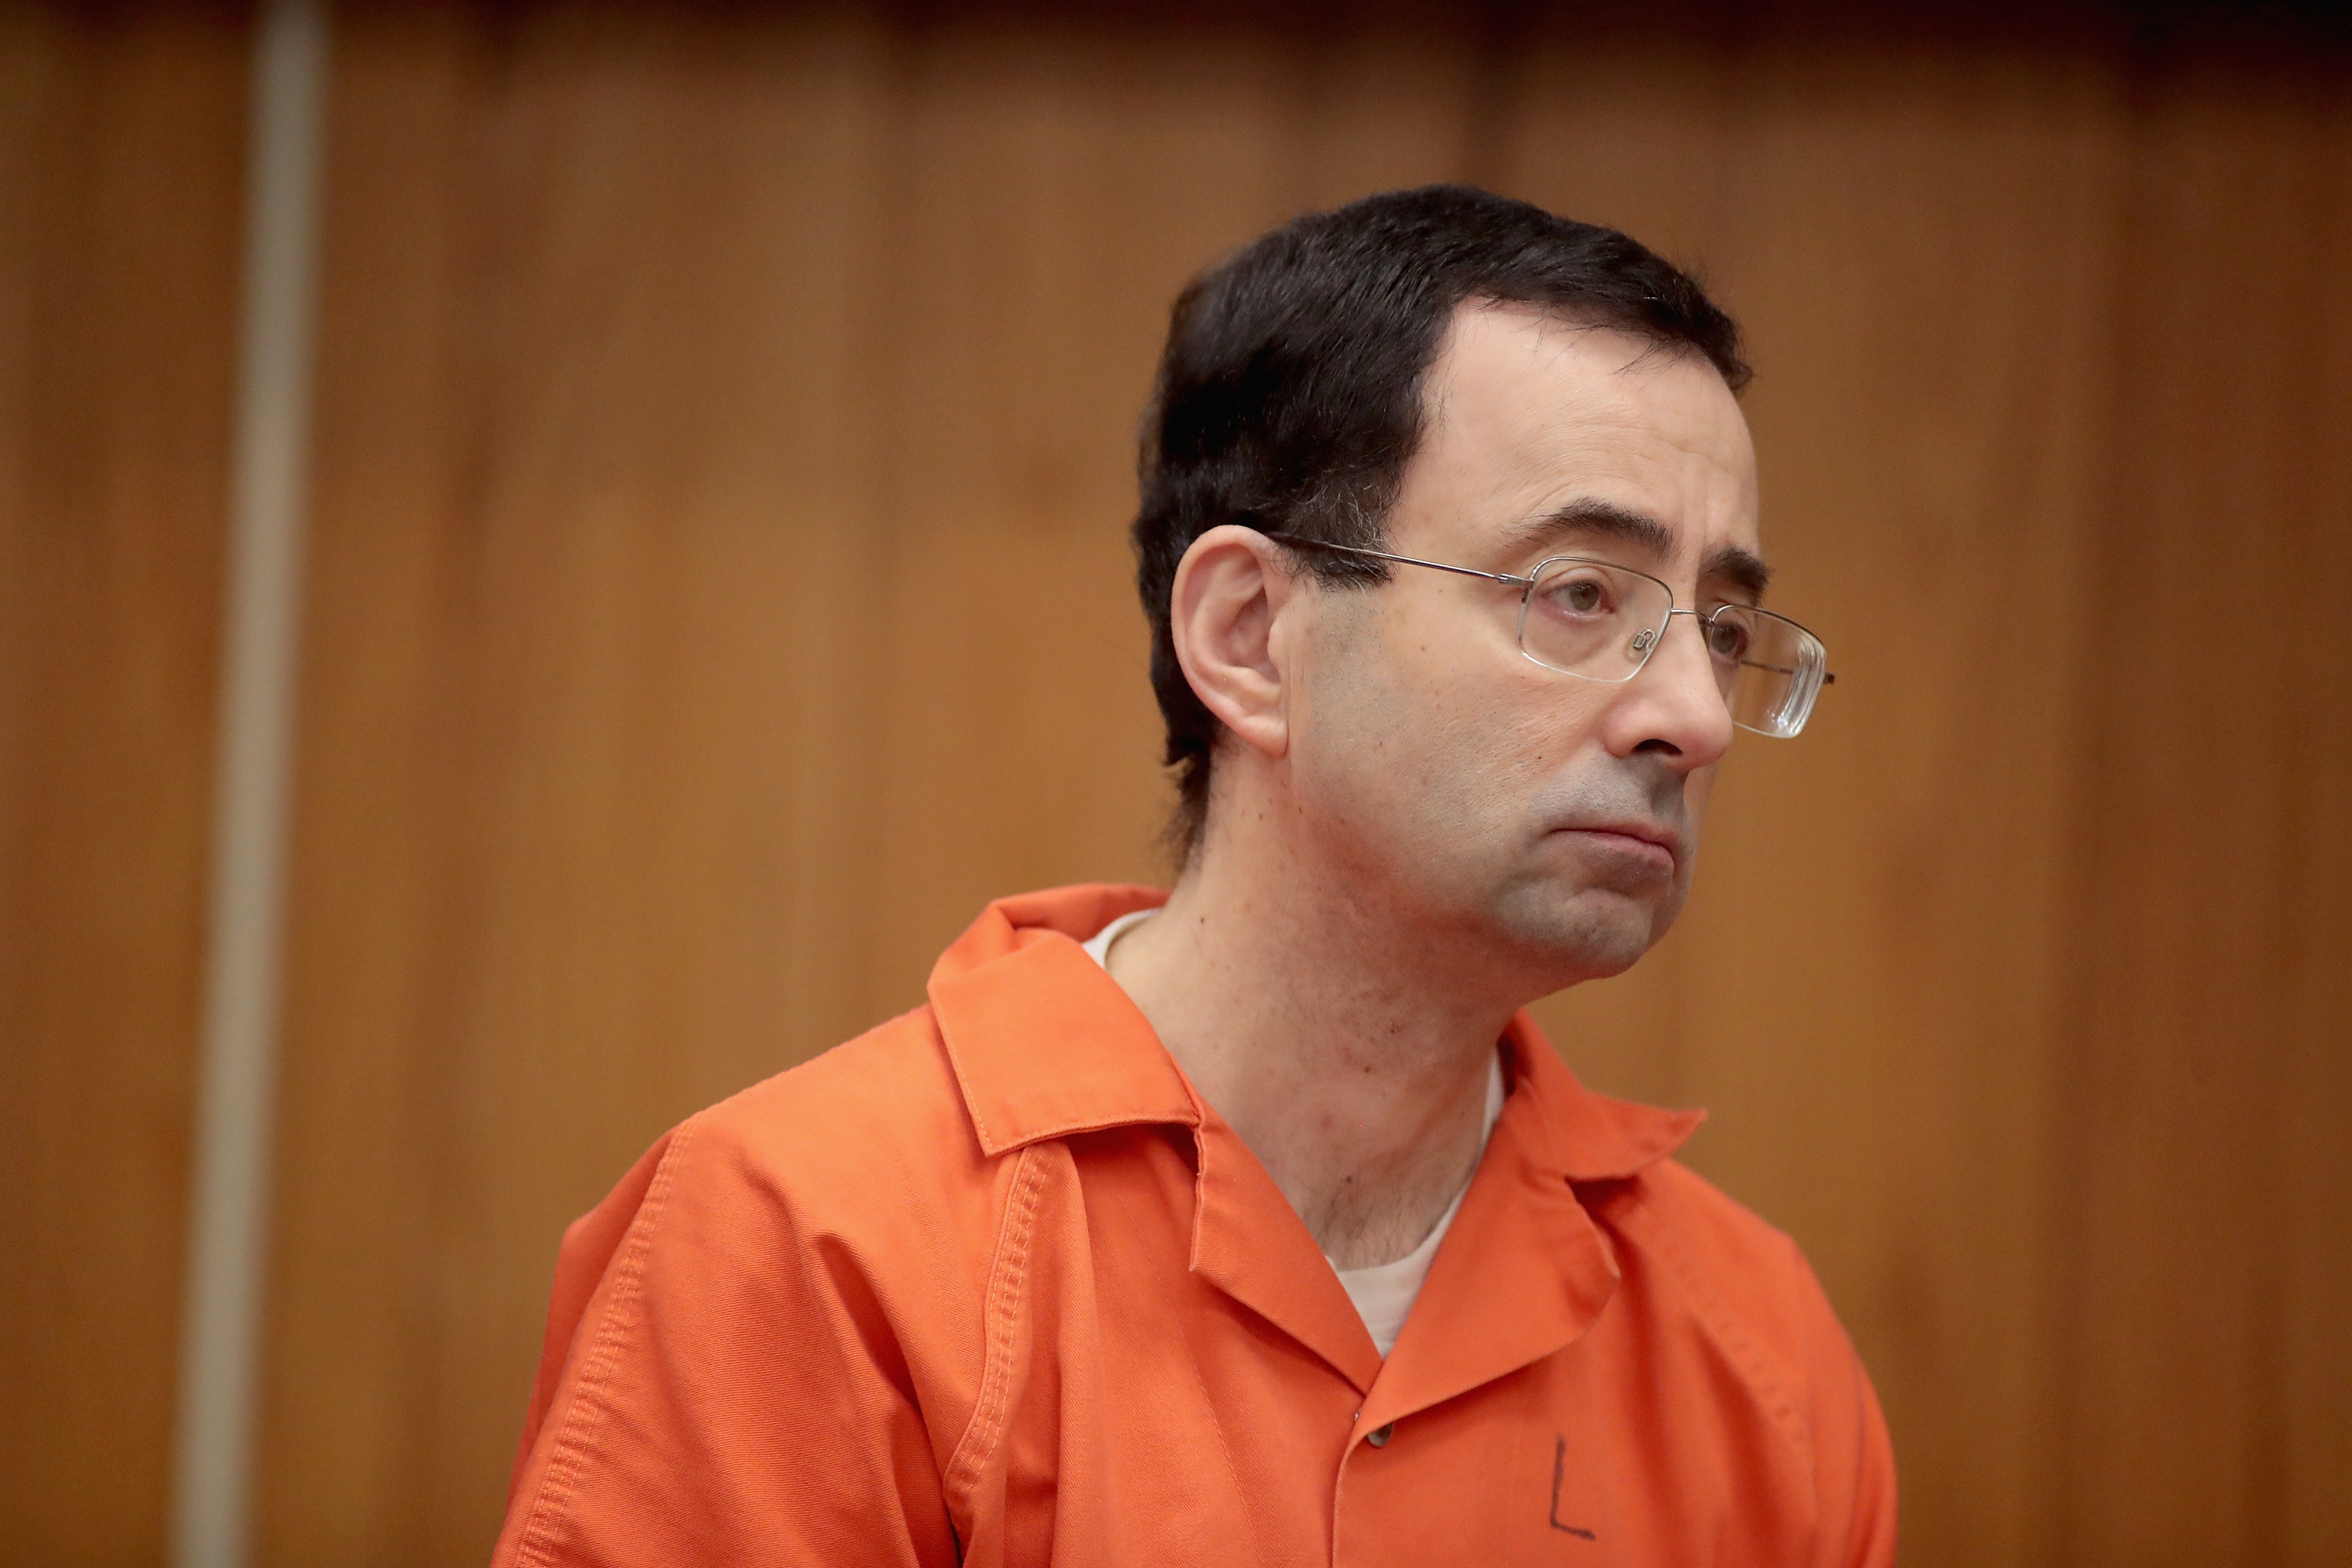 Larry Nassar in a prison jumpsuit during his trial